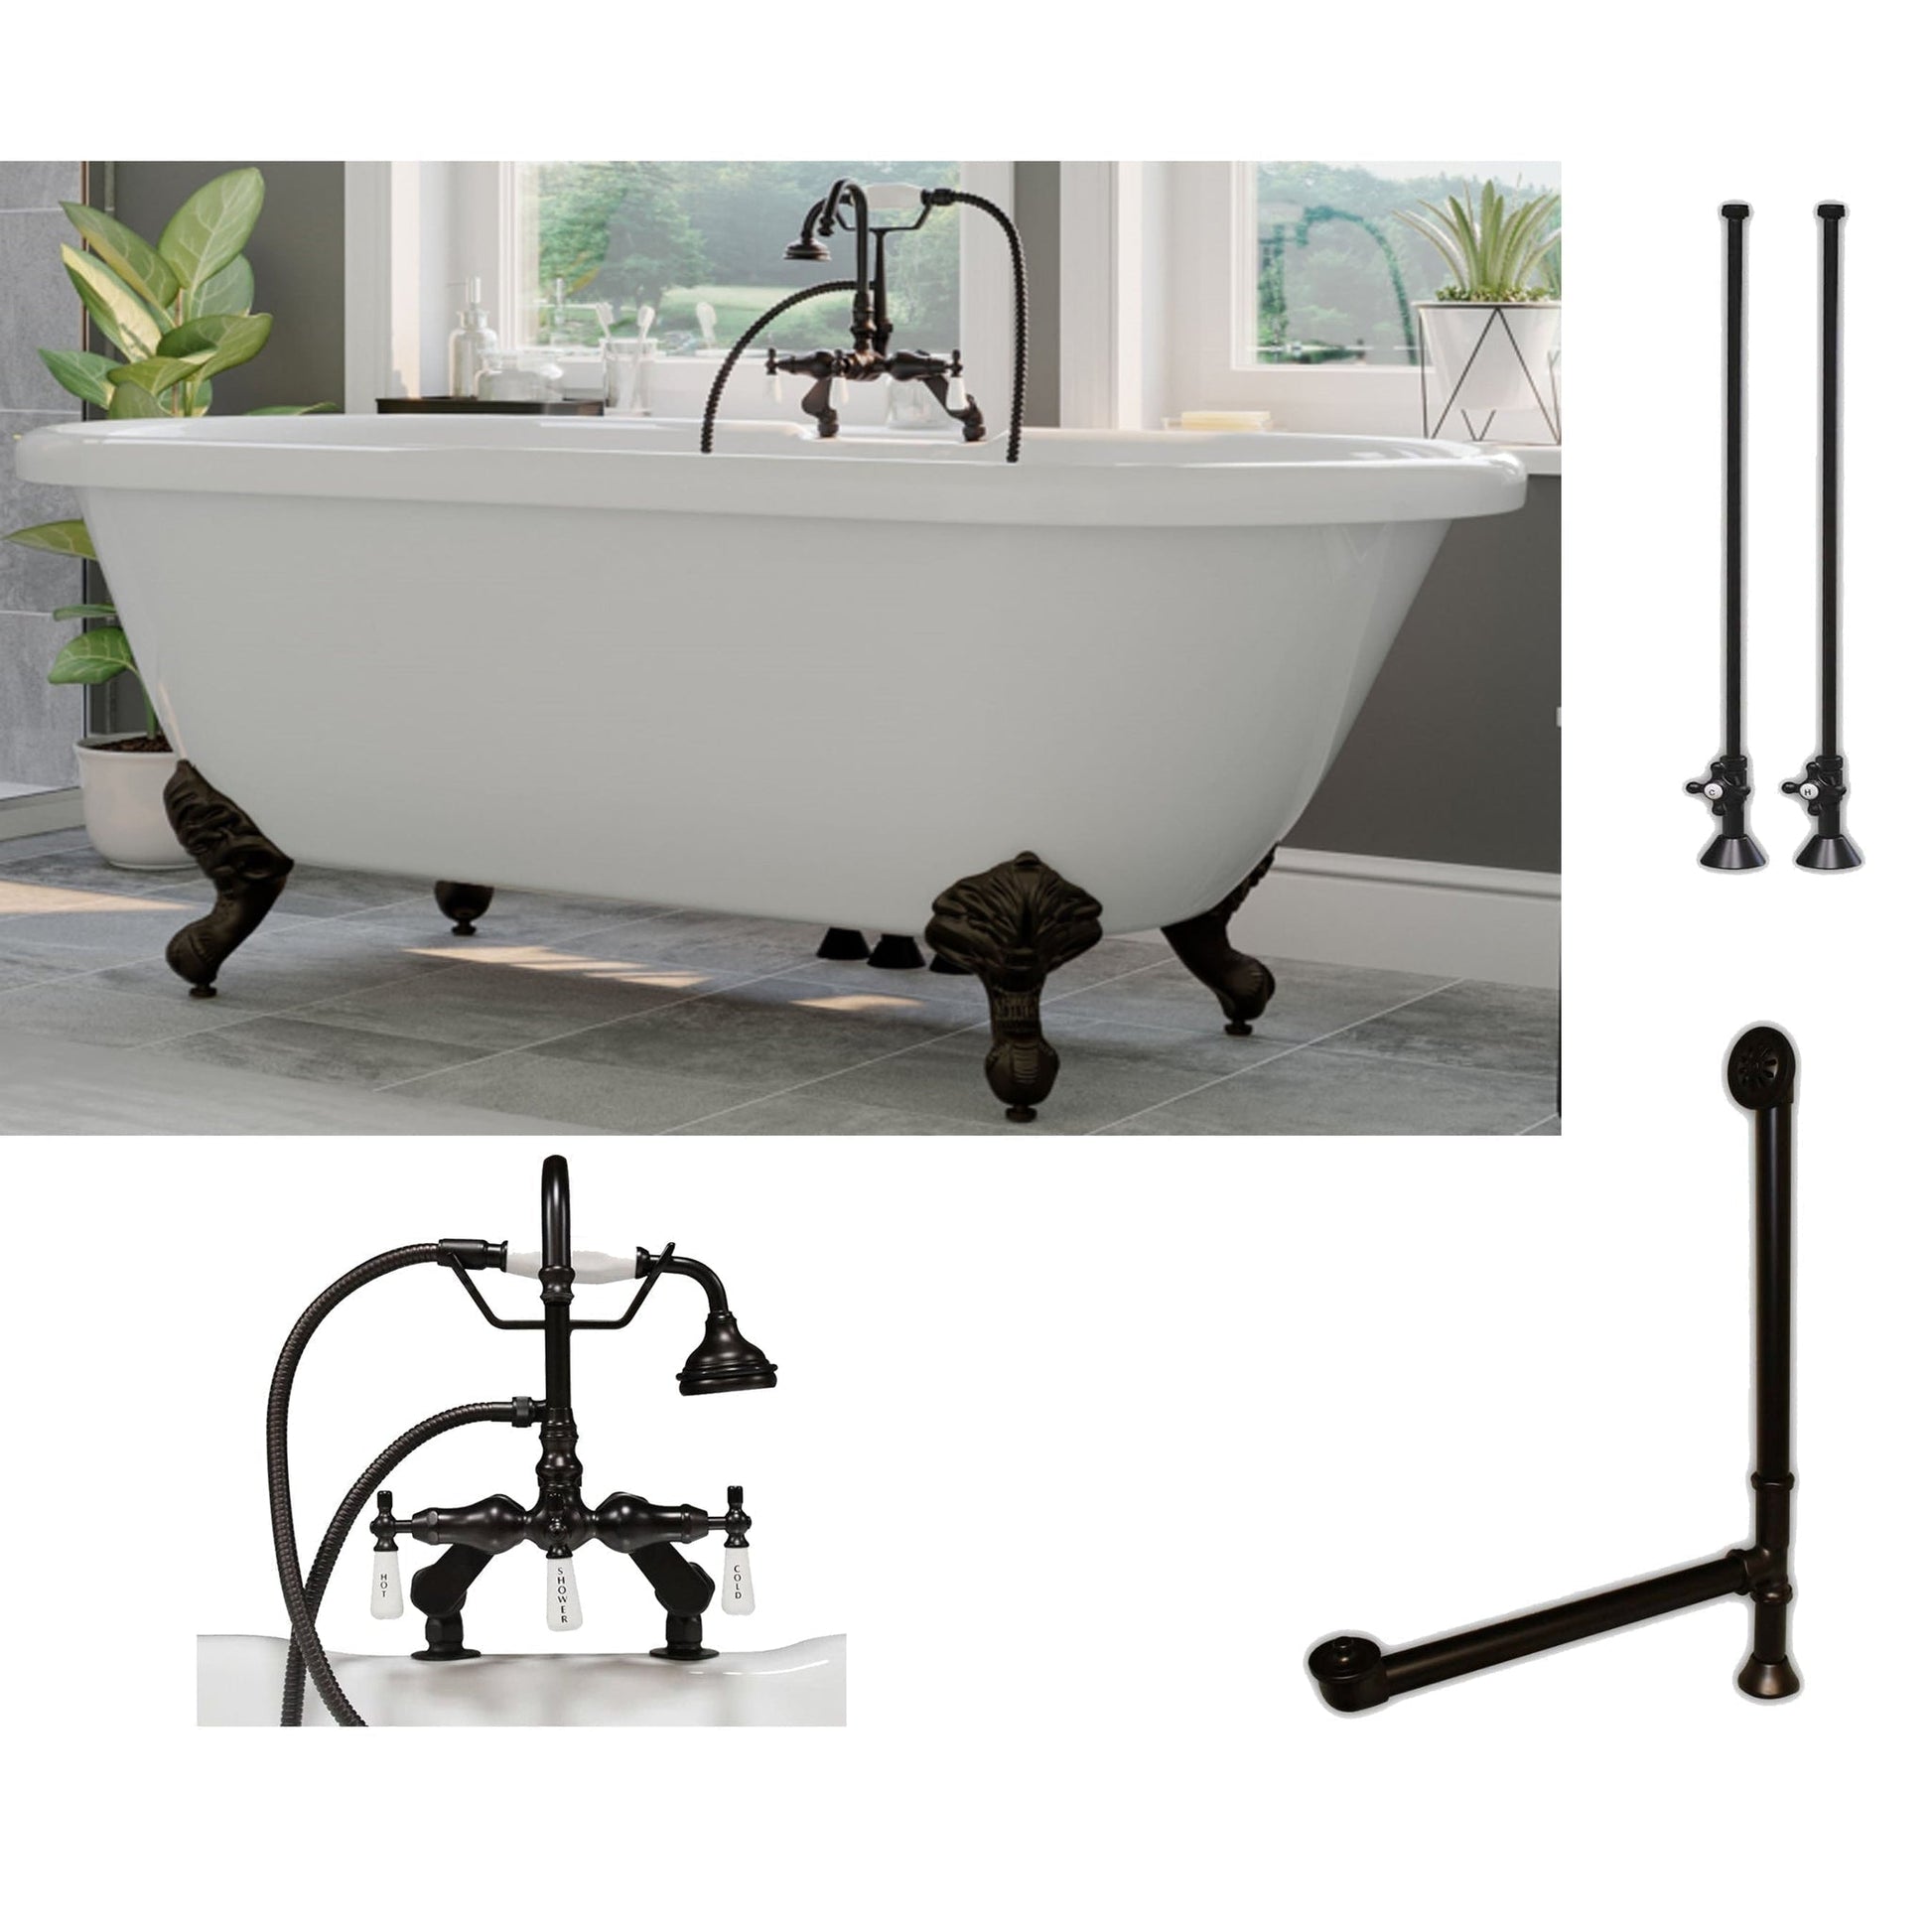 Cambridge Plumbing 60" White Acrylic Double Ended Clawfoot Bathtub With Deck Holes And Complete Plumbing Package Including Porcelain Lever English Telephone Brass Faucet, Supply Lines, Drain And Overflow Assembly In Oil Rubbed Bronze